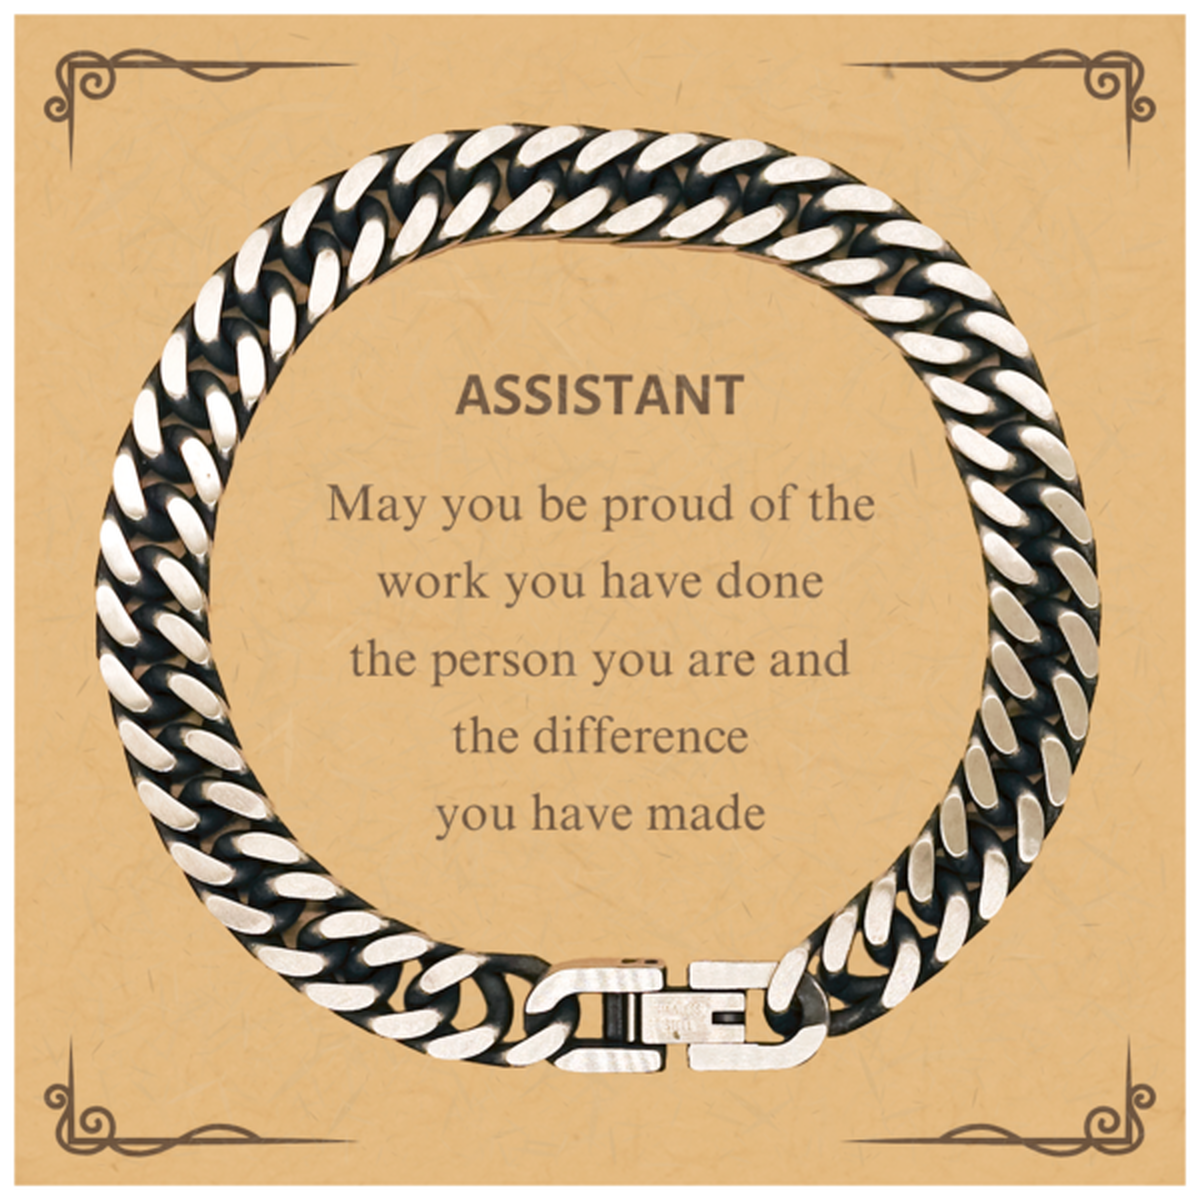 Assistant May you be proud of the work you have done, Retirement Assistant Cuban Link Chain Bracelet for Colleague Appreciation Gifts Amazing for Assistant